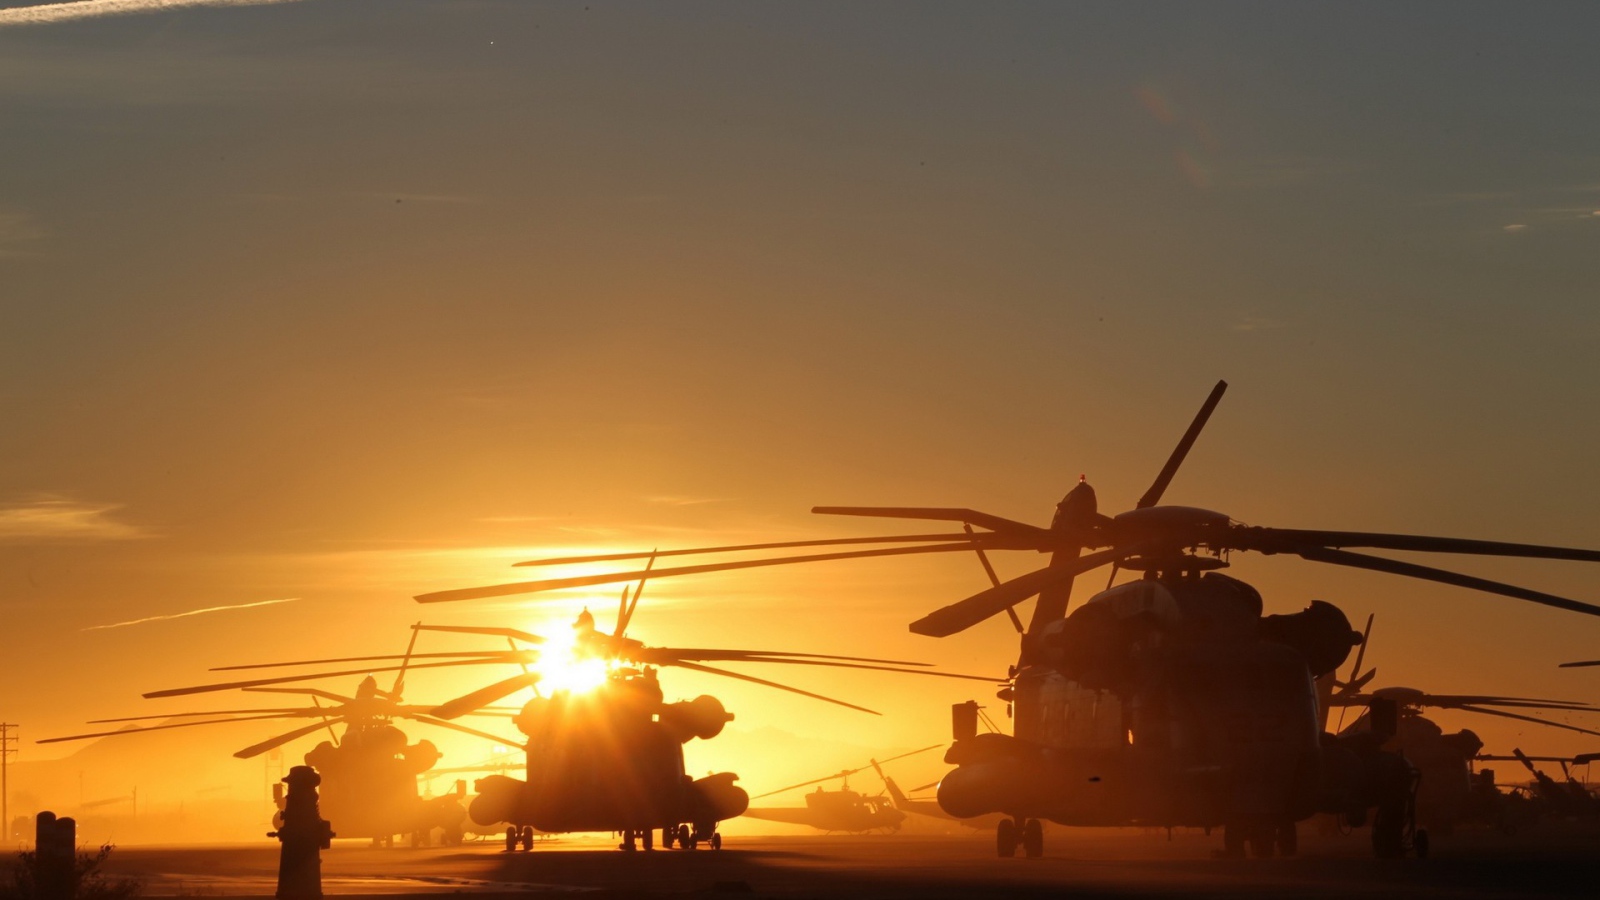 Several helicopter at sunset